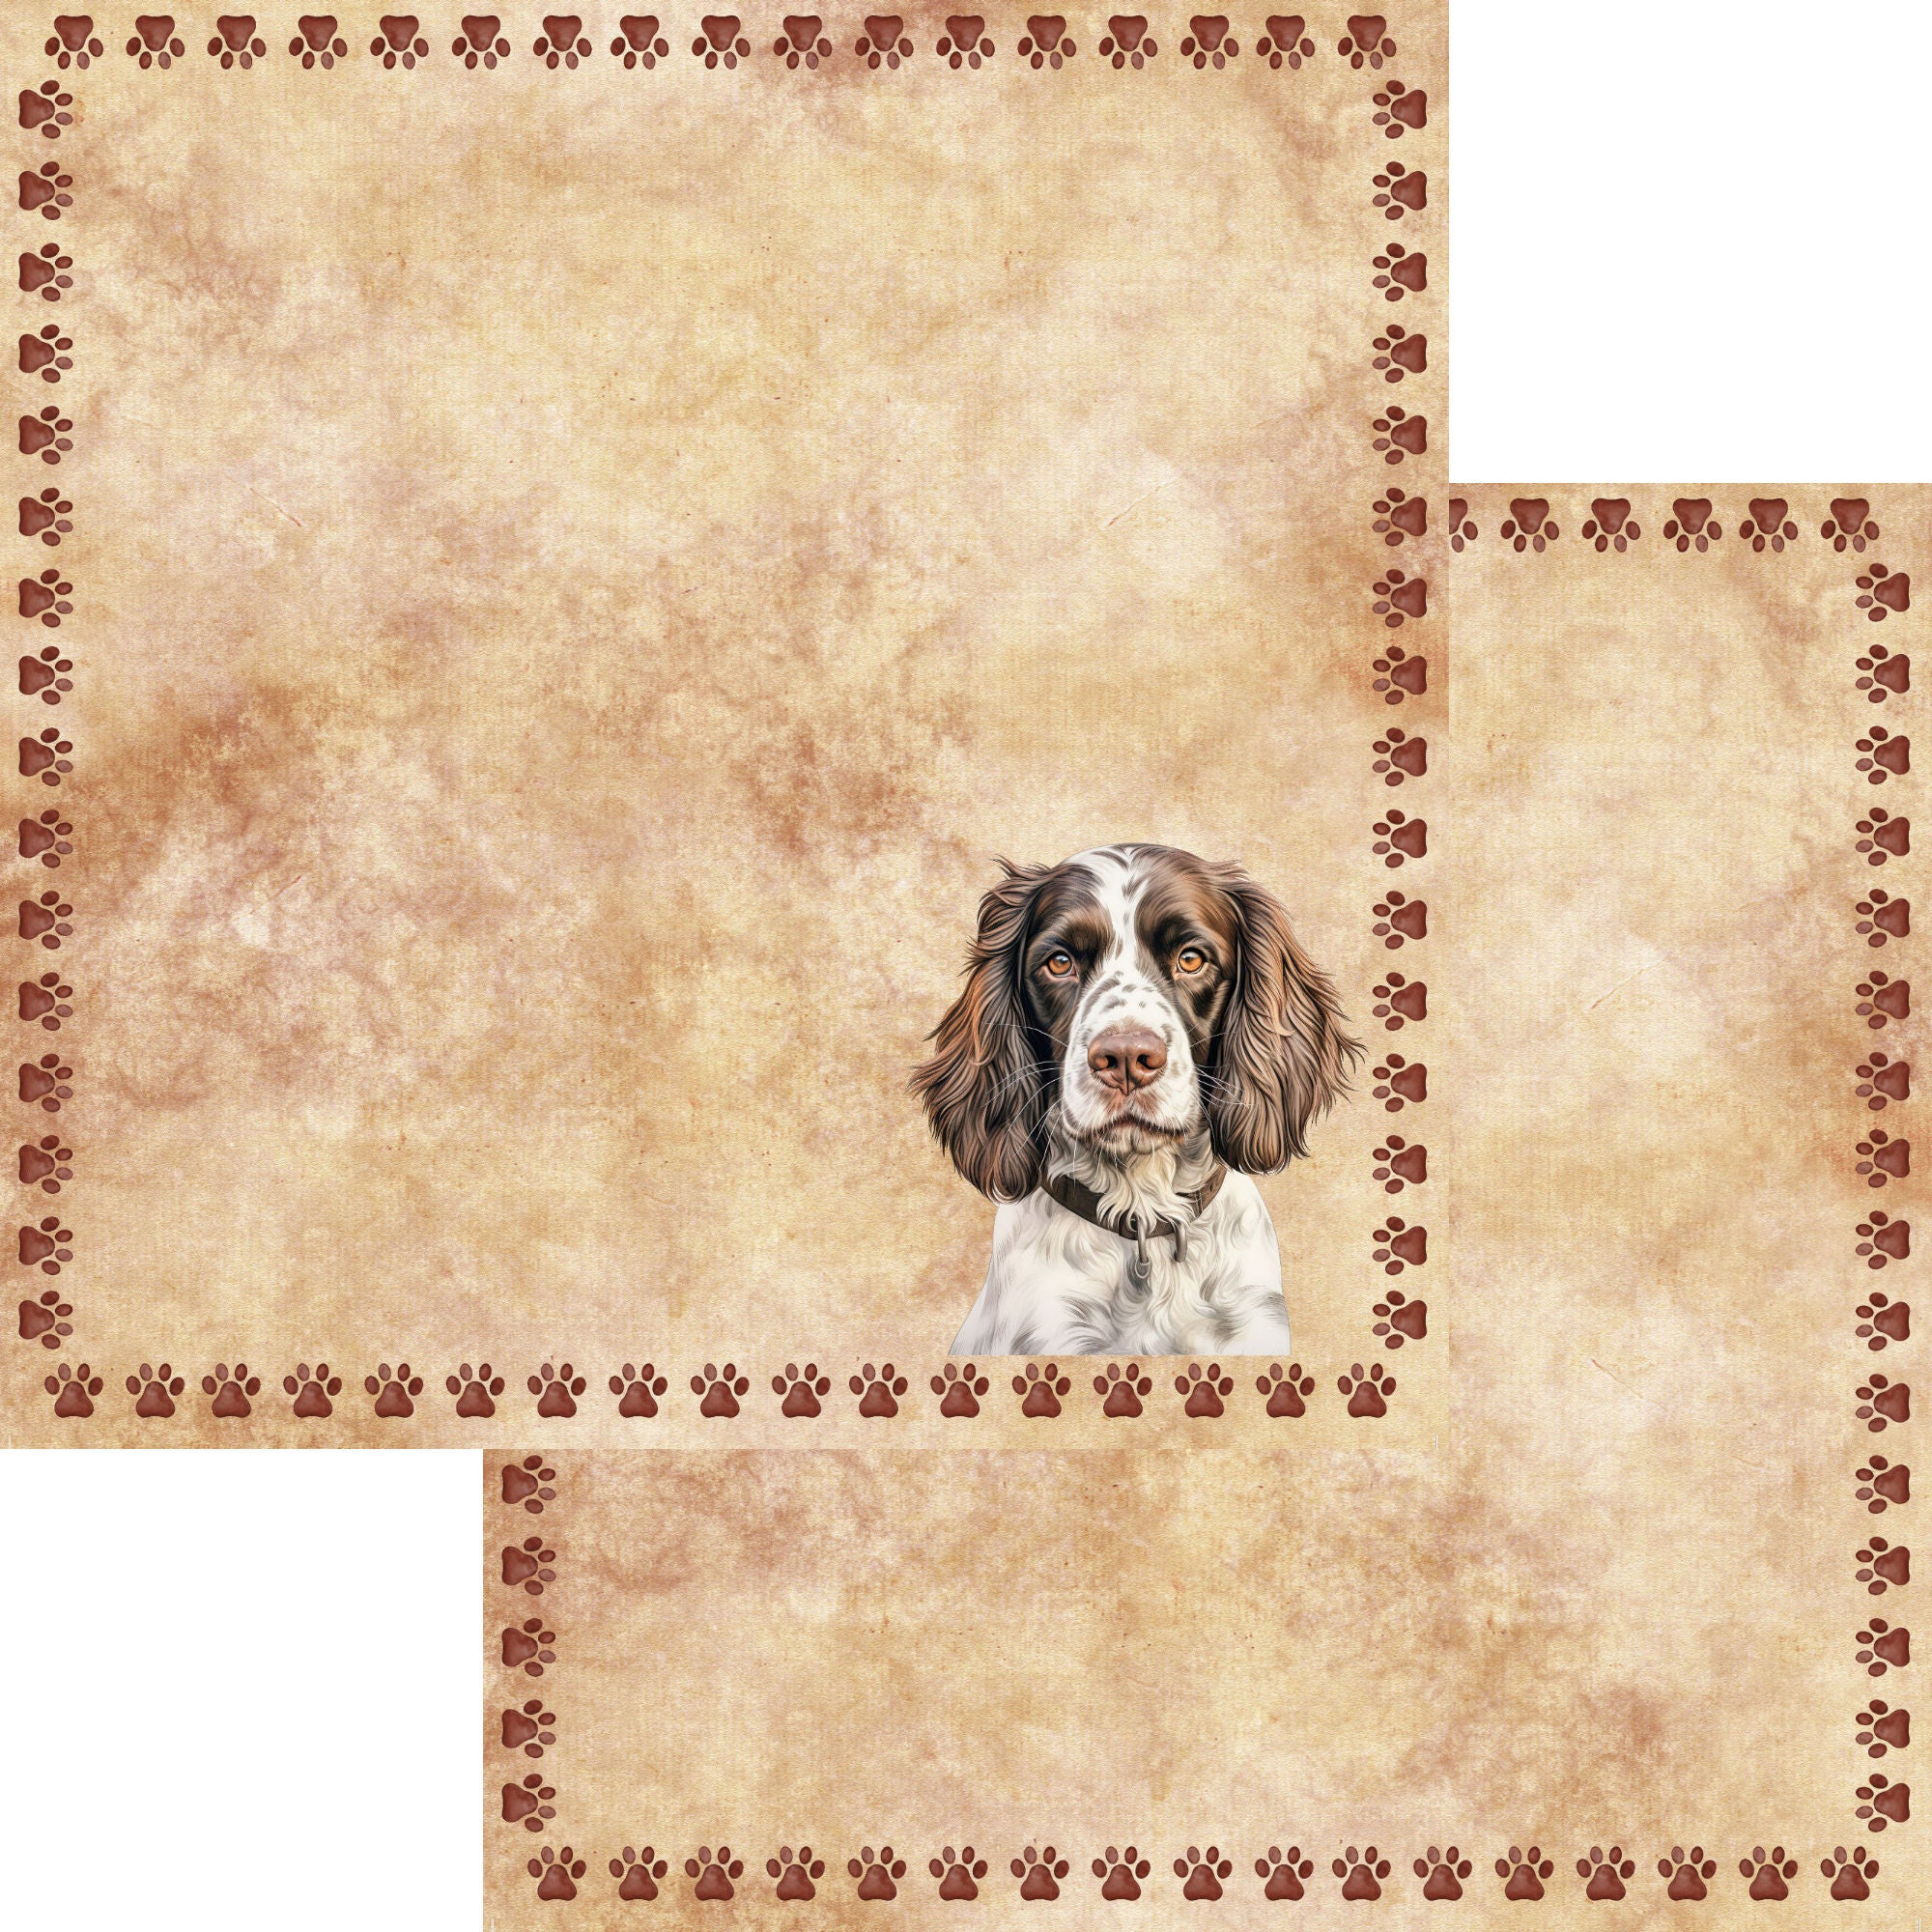 Dog Breeds Collection Springer Spaniel 12 x 12 Double-Sided Scrapbook Paper by SSC Designs